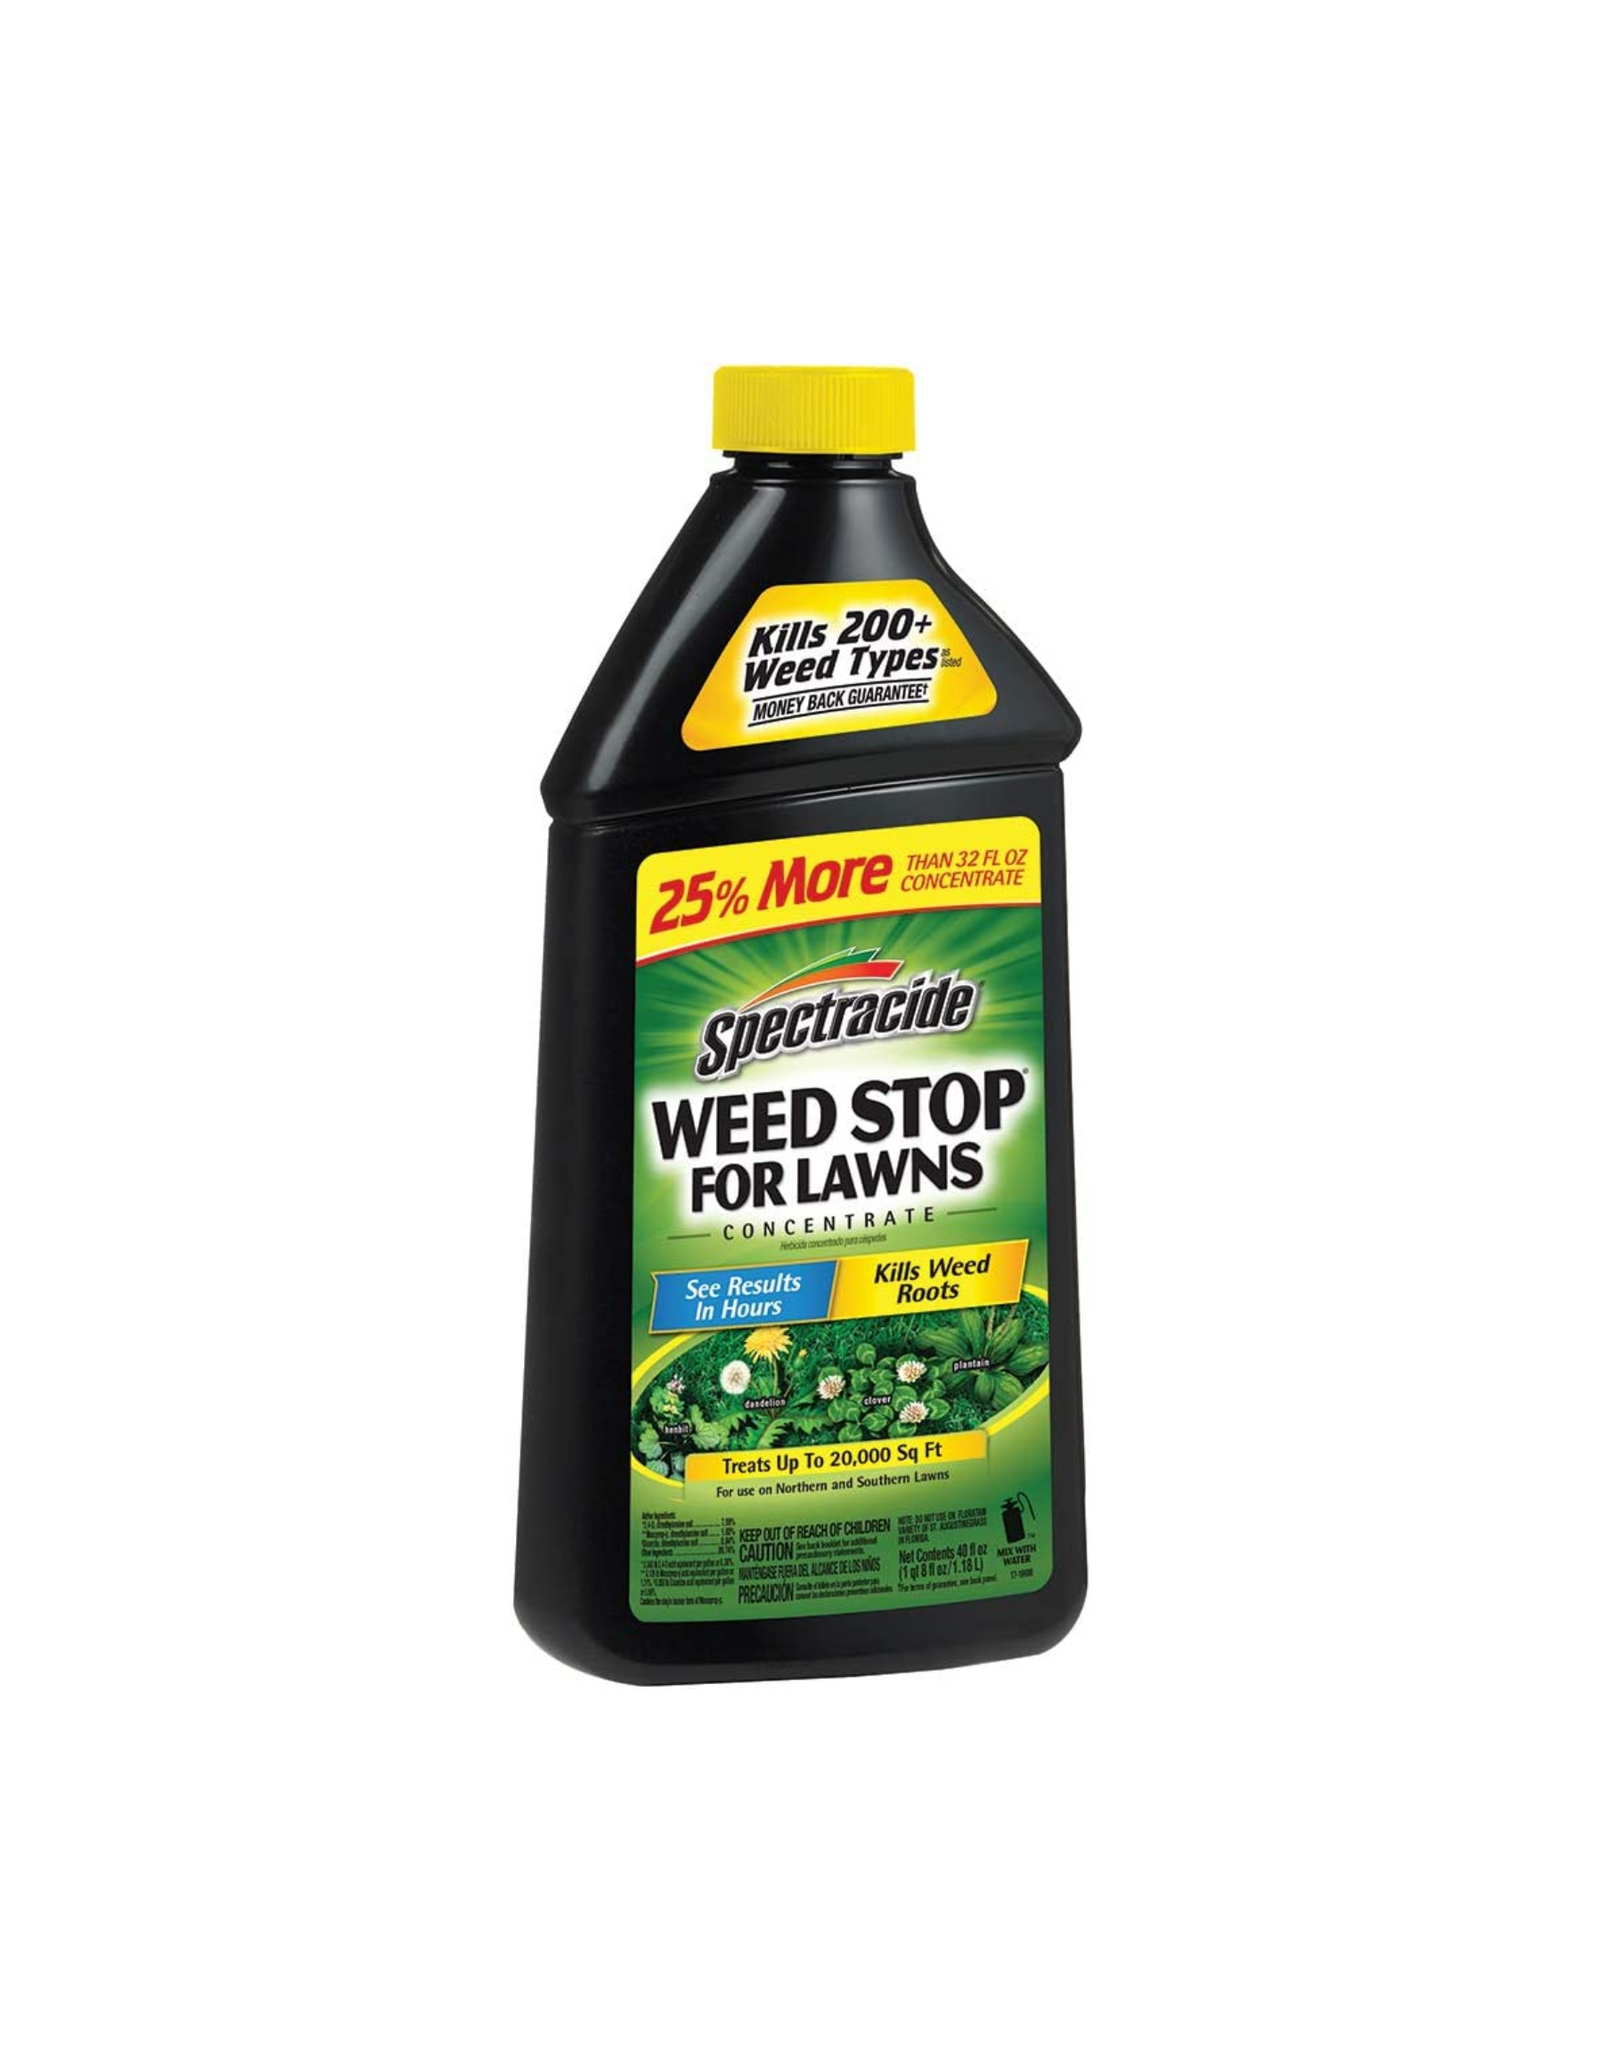 Spectracide Weed Stop For Lawns Concentrate 40 fl oz - Treats Up to 20,000 Sq Ft